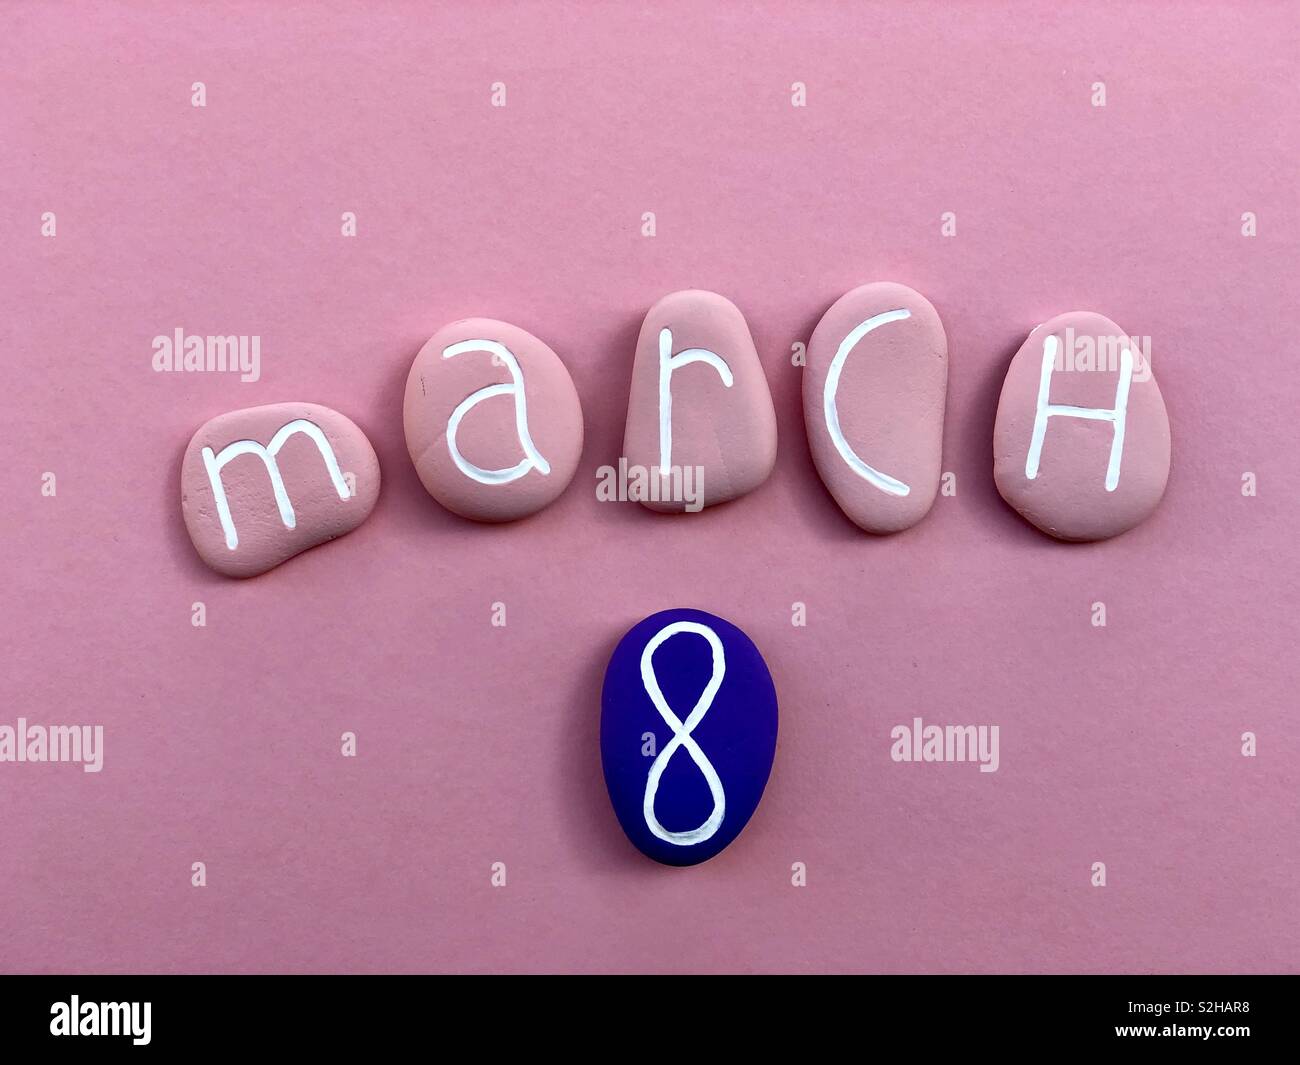 8 March, women’s day celabrated with pink colored stones over pink background Stock Photo